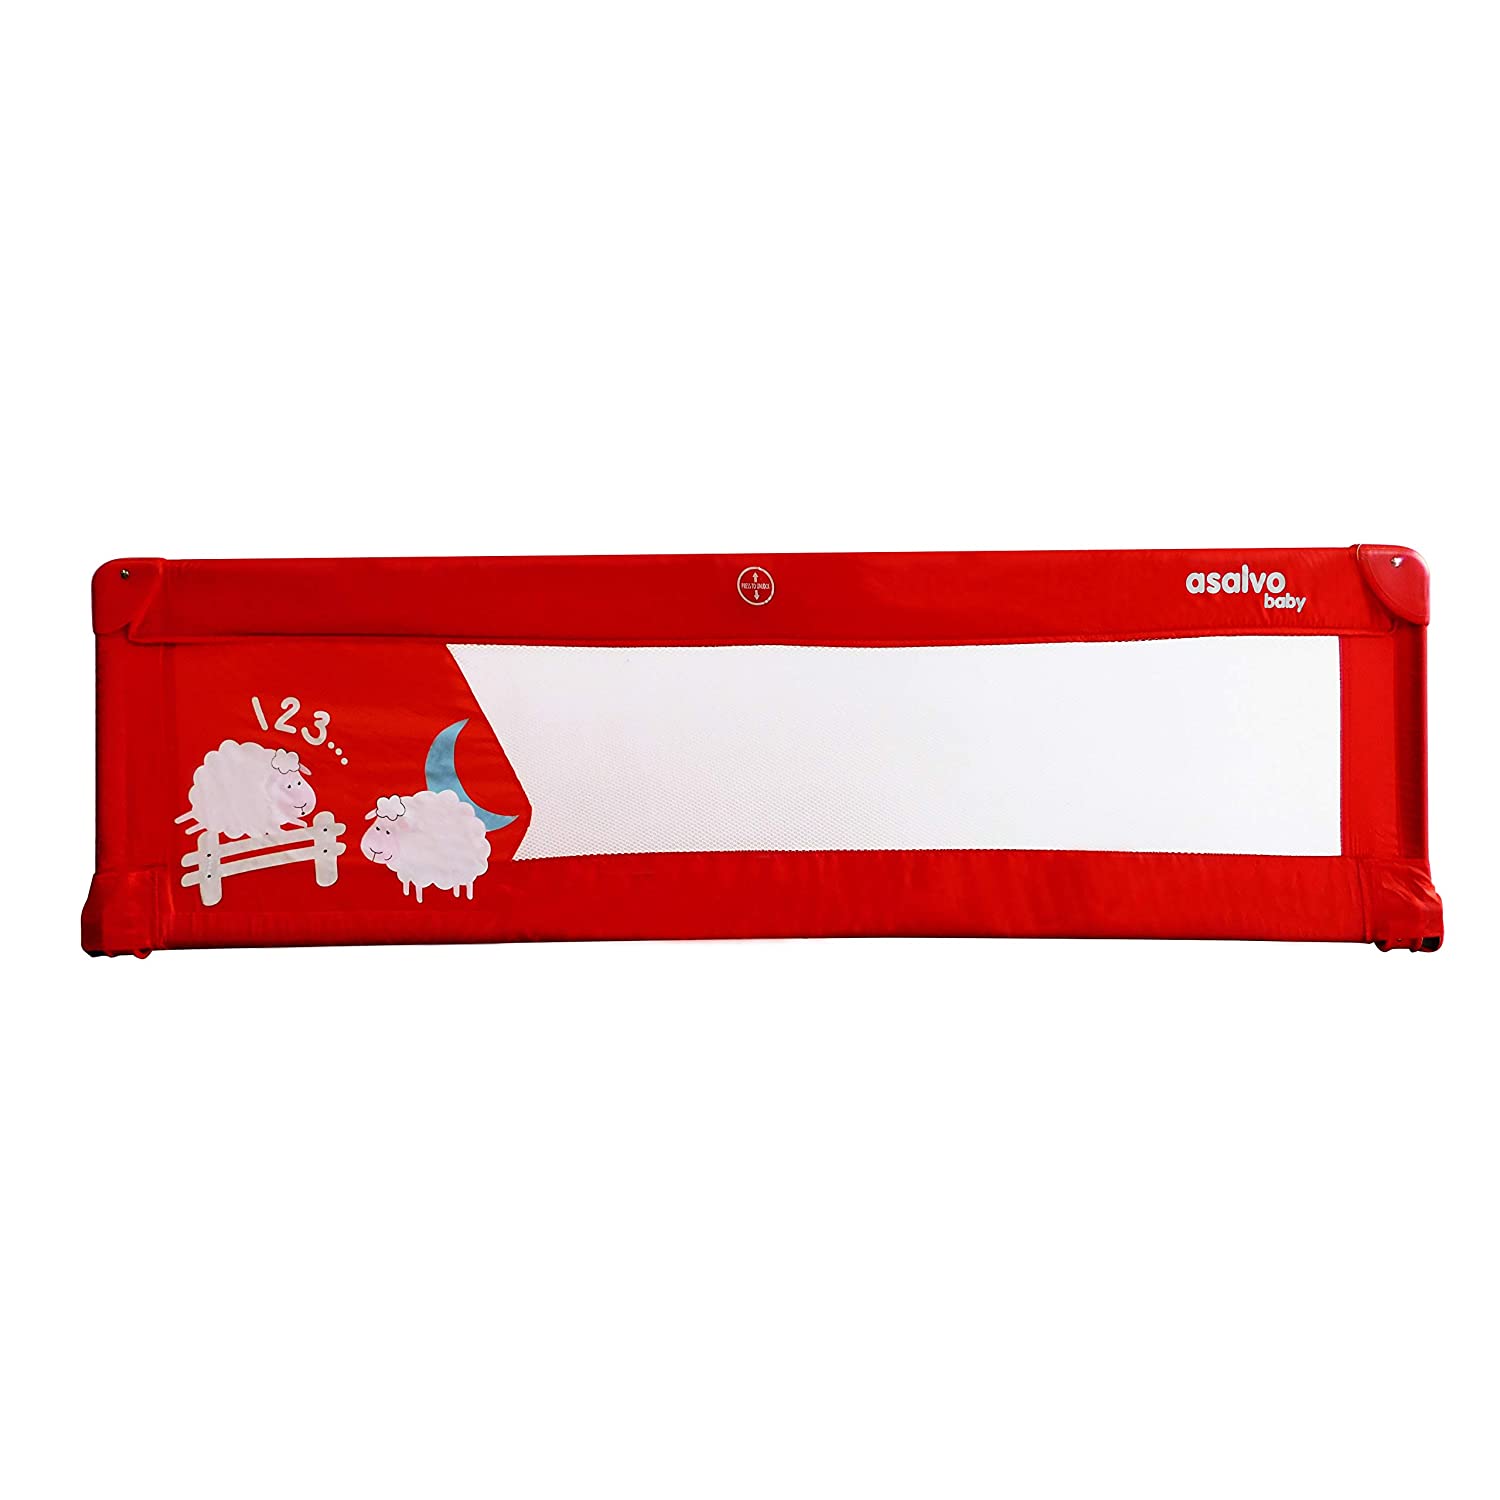 Asalvo Sheep Bed Guard 150 cm Red